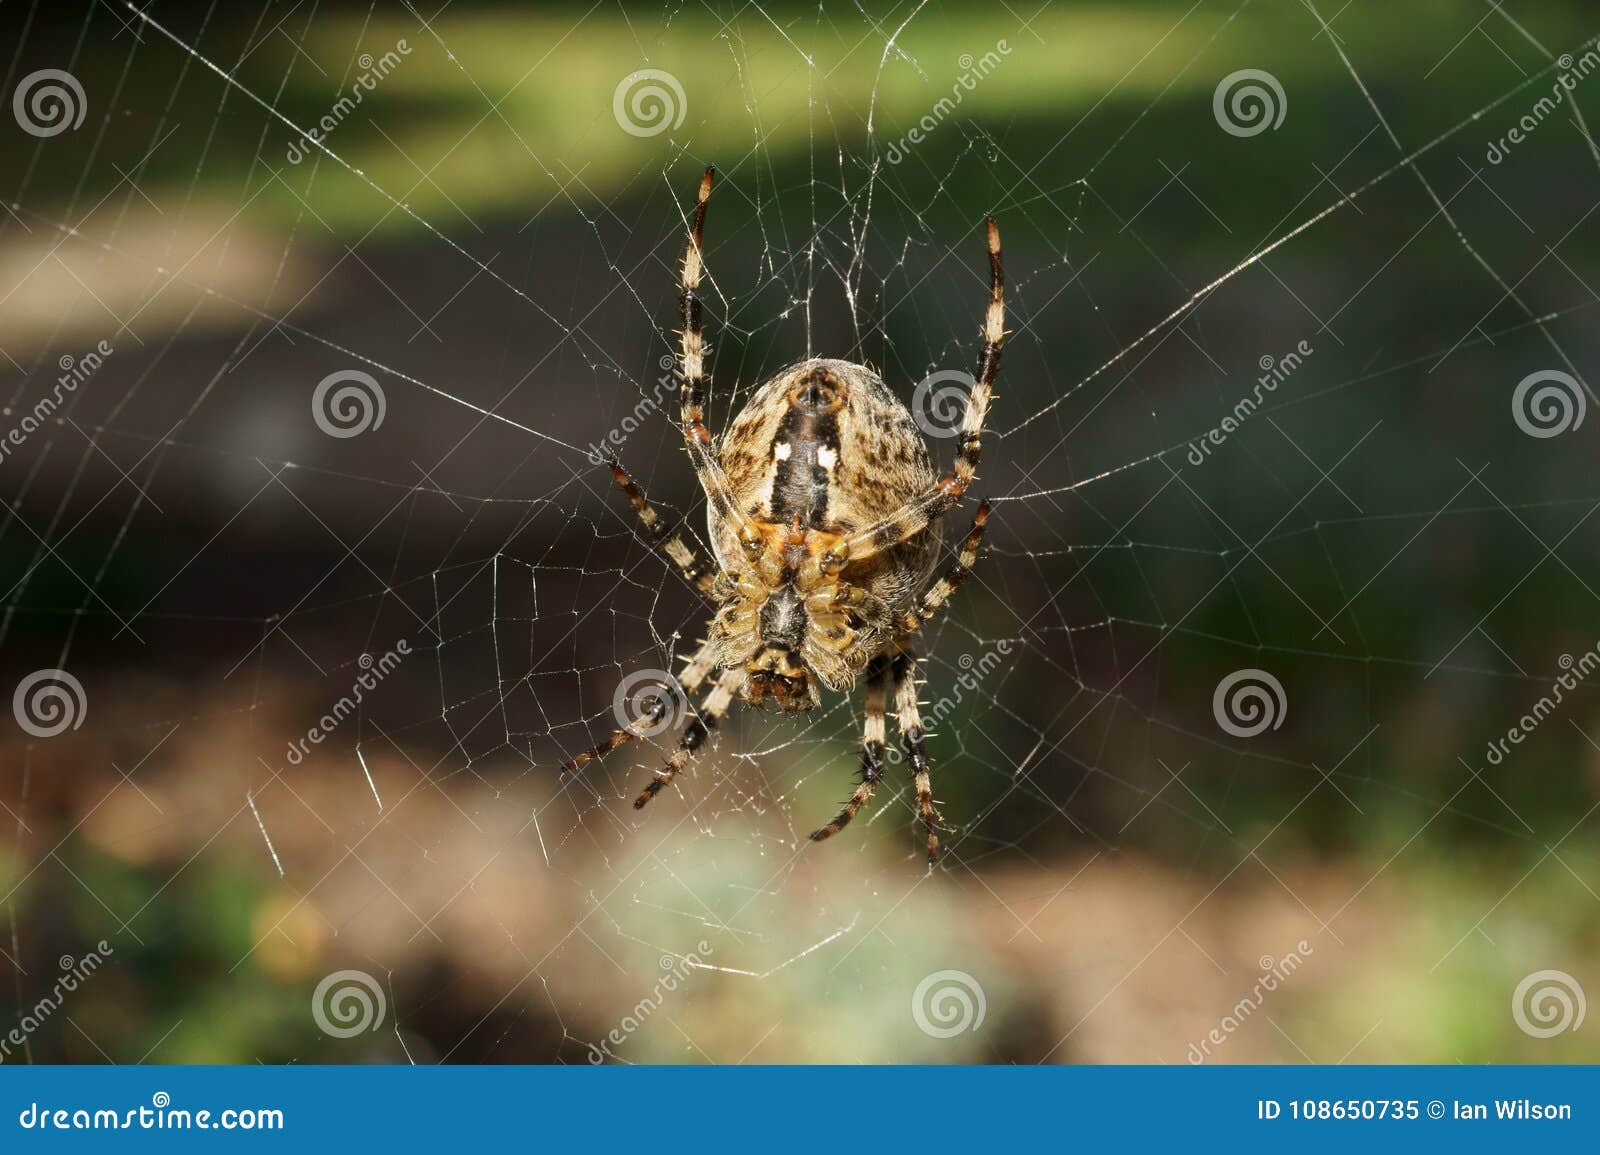 Common Garden Spider Stock Image Image Of Pinfoldphotos 108650735